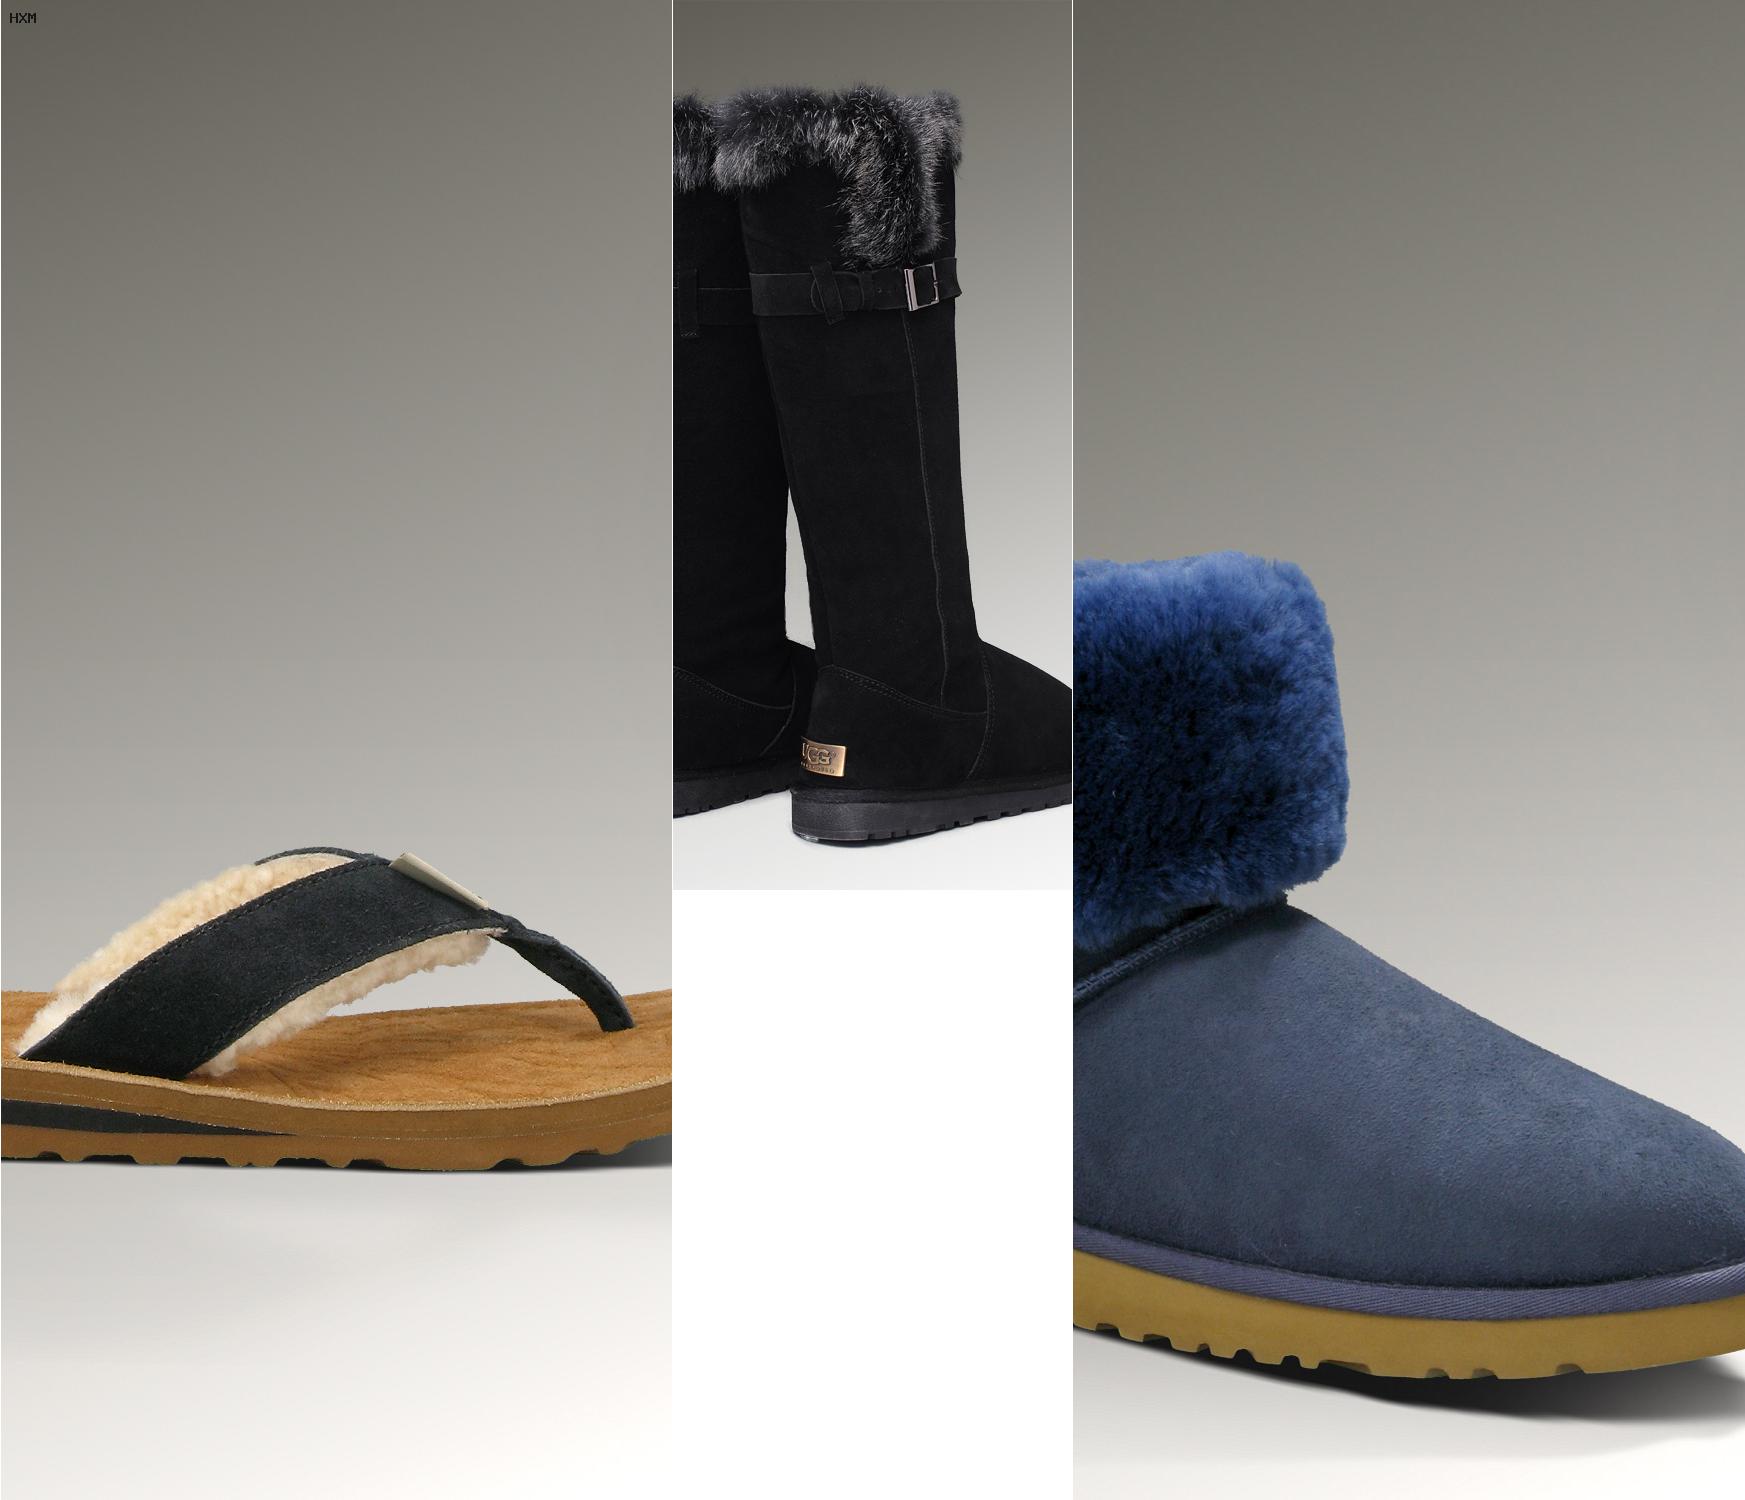 ugg outlet milano indirizzo